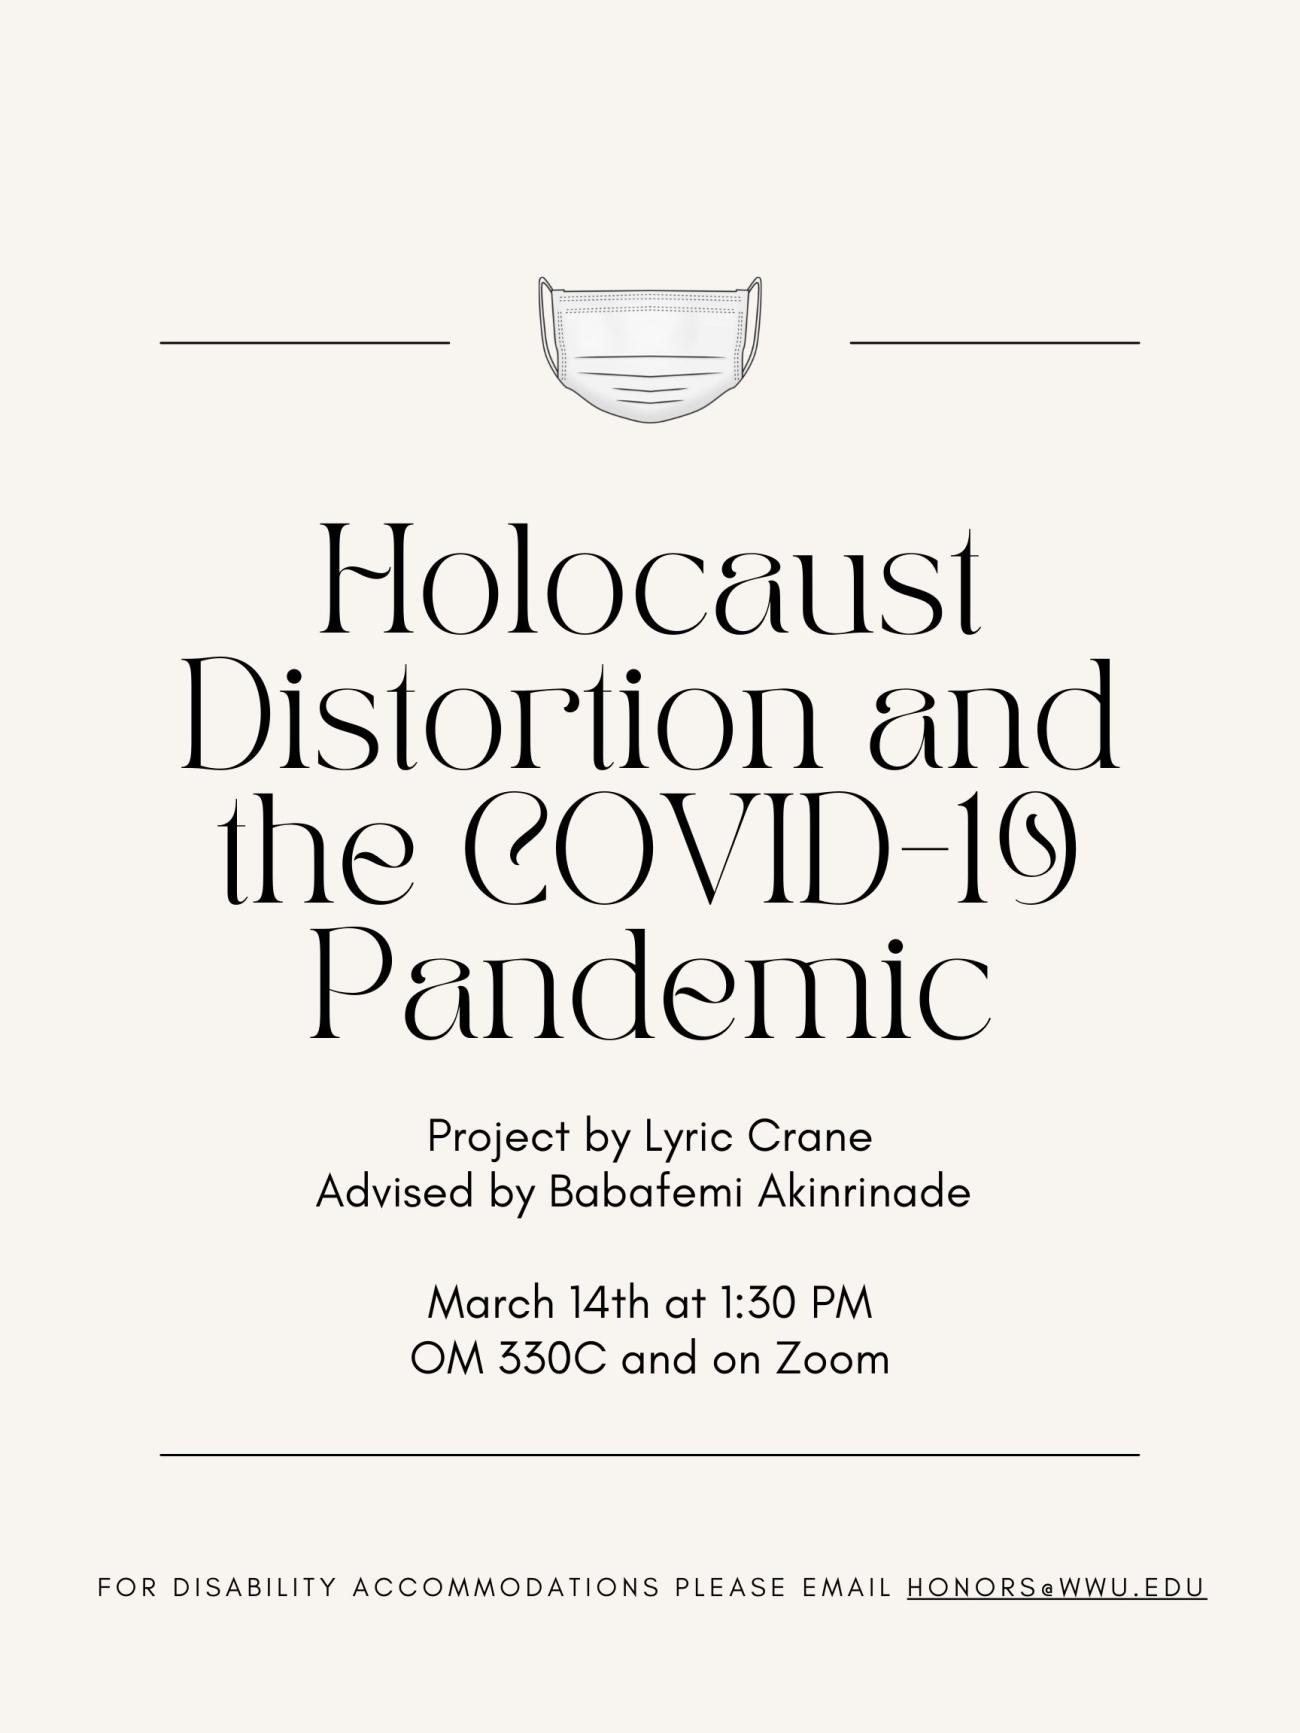 An off white poster with a mask on it. The text reads: "Holocaust Distortion and the COVID-19 Pandemic. Project by Lyric Crane, Advised by Babafemi Akinrinade. Marth 14th at 1:30 PM, OM330C and on Zoom. For disability accommodations, please email honors@wwu.edu"